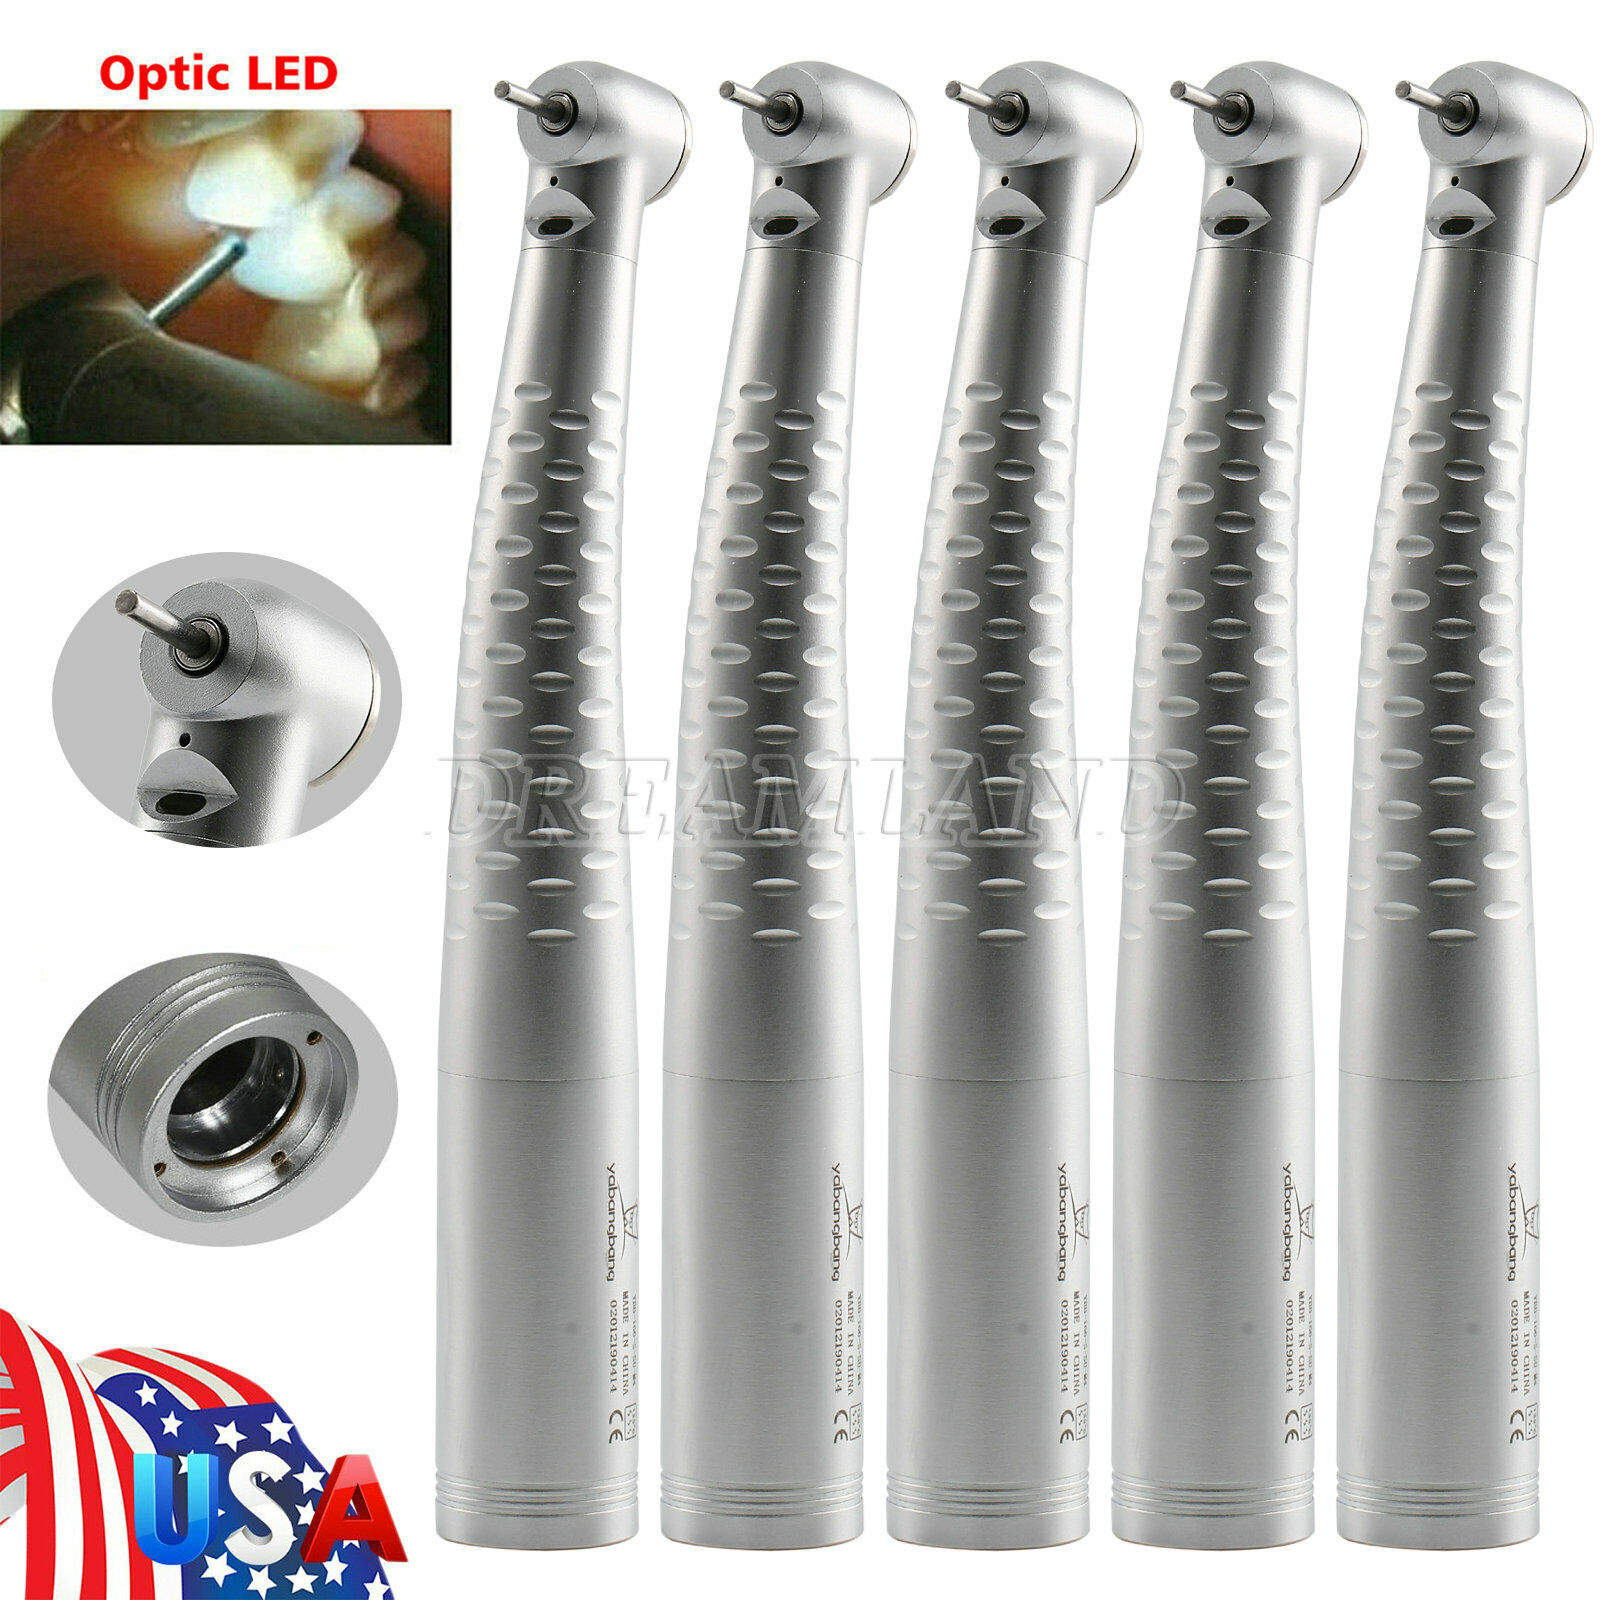 5PCS dental 6 hole high speed push button LED quick connect handpiece US